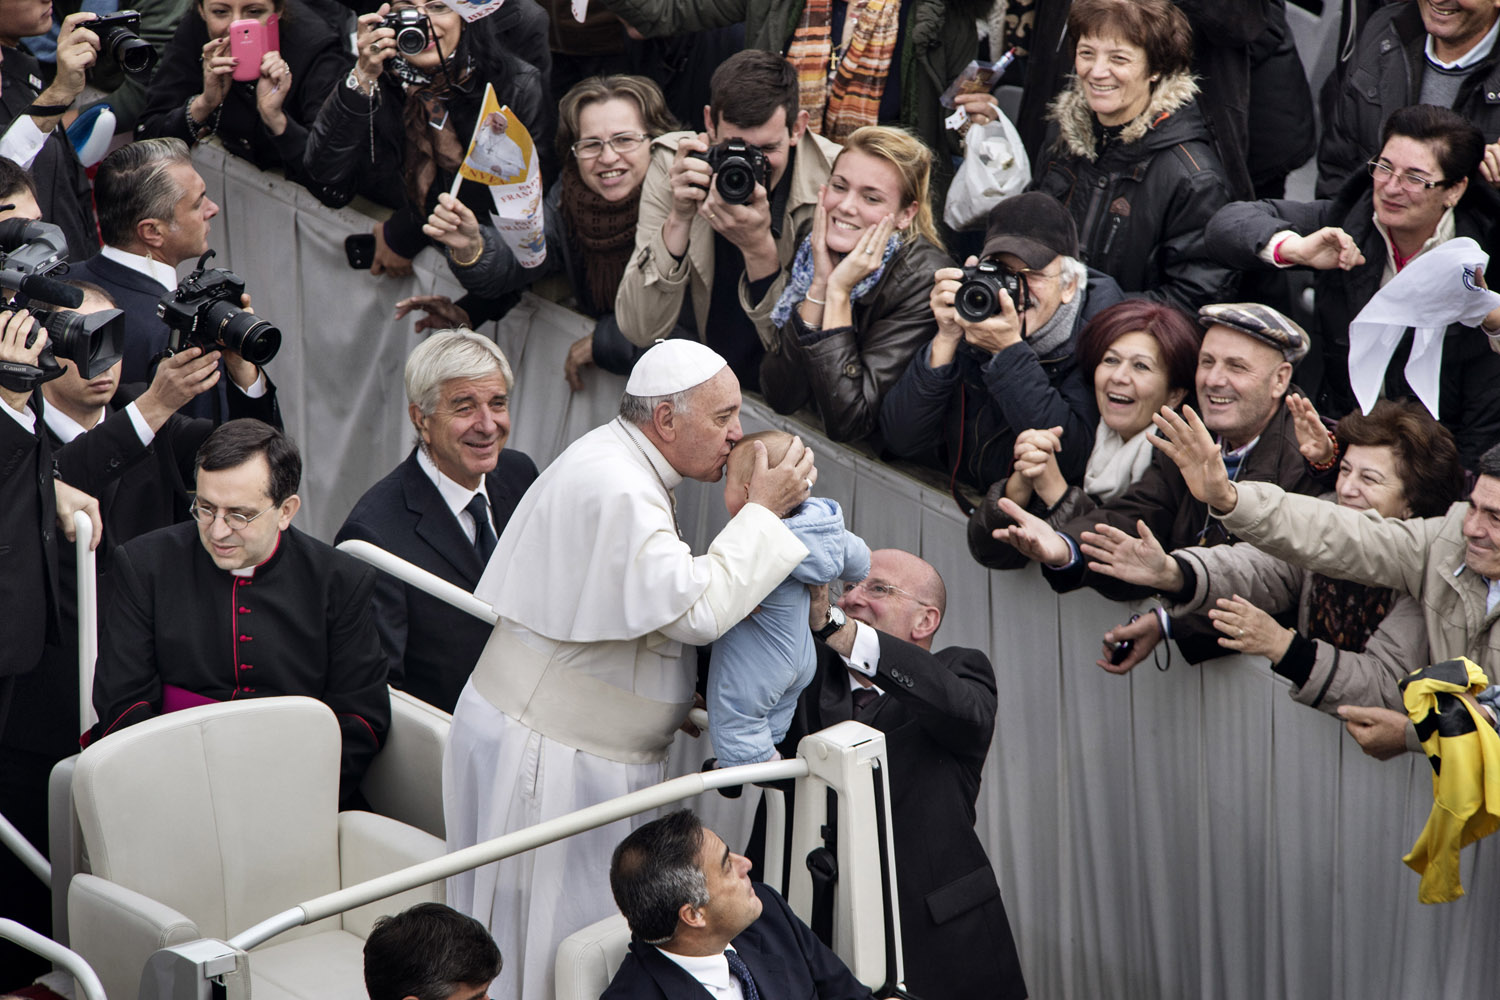 vatican city, italy. nov 13th 2013. Saint Peter's Square, at 10:30 am Pope Francis General Audience.